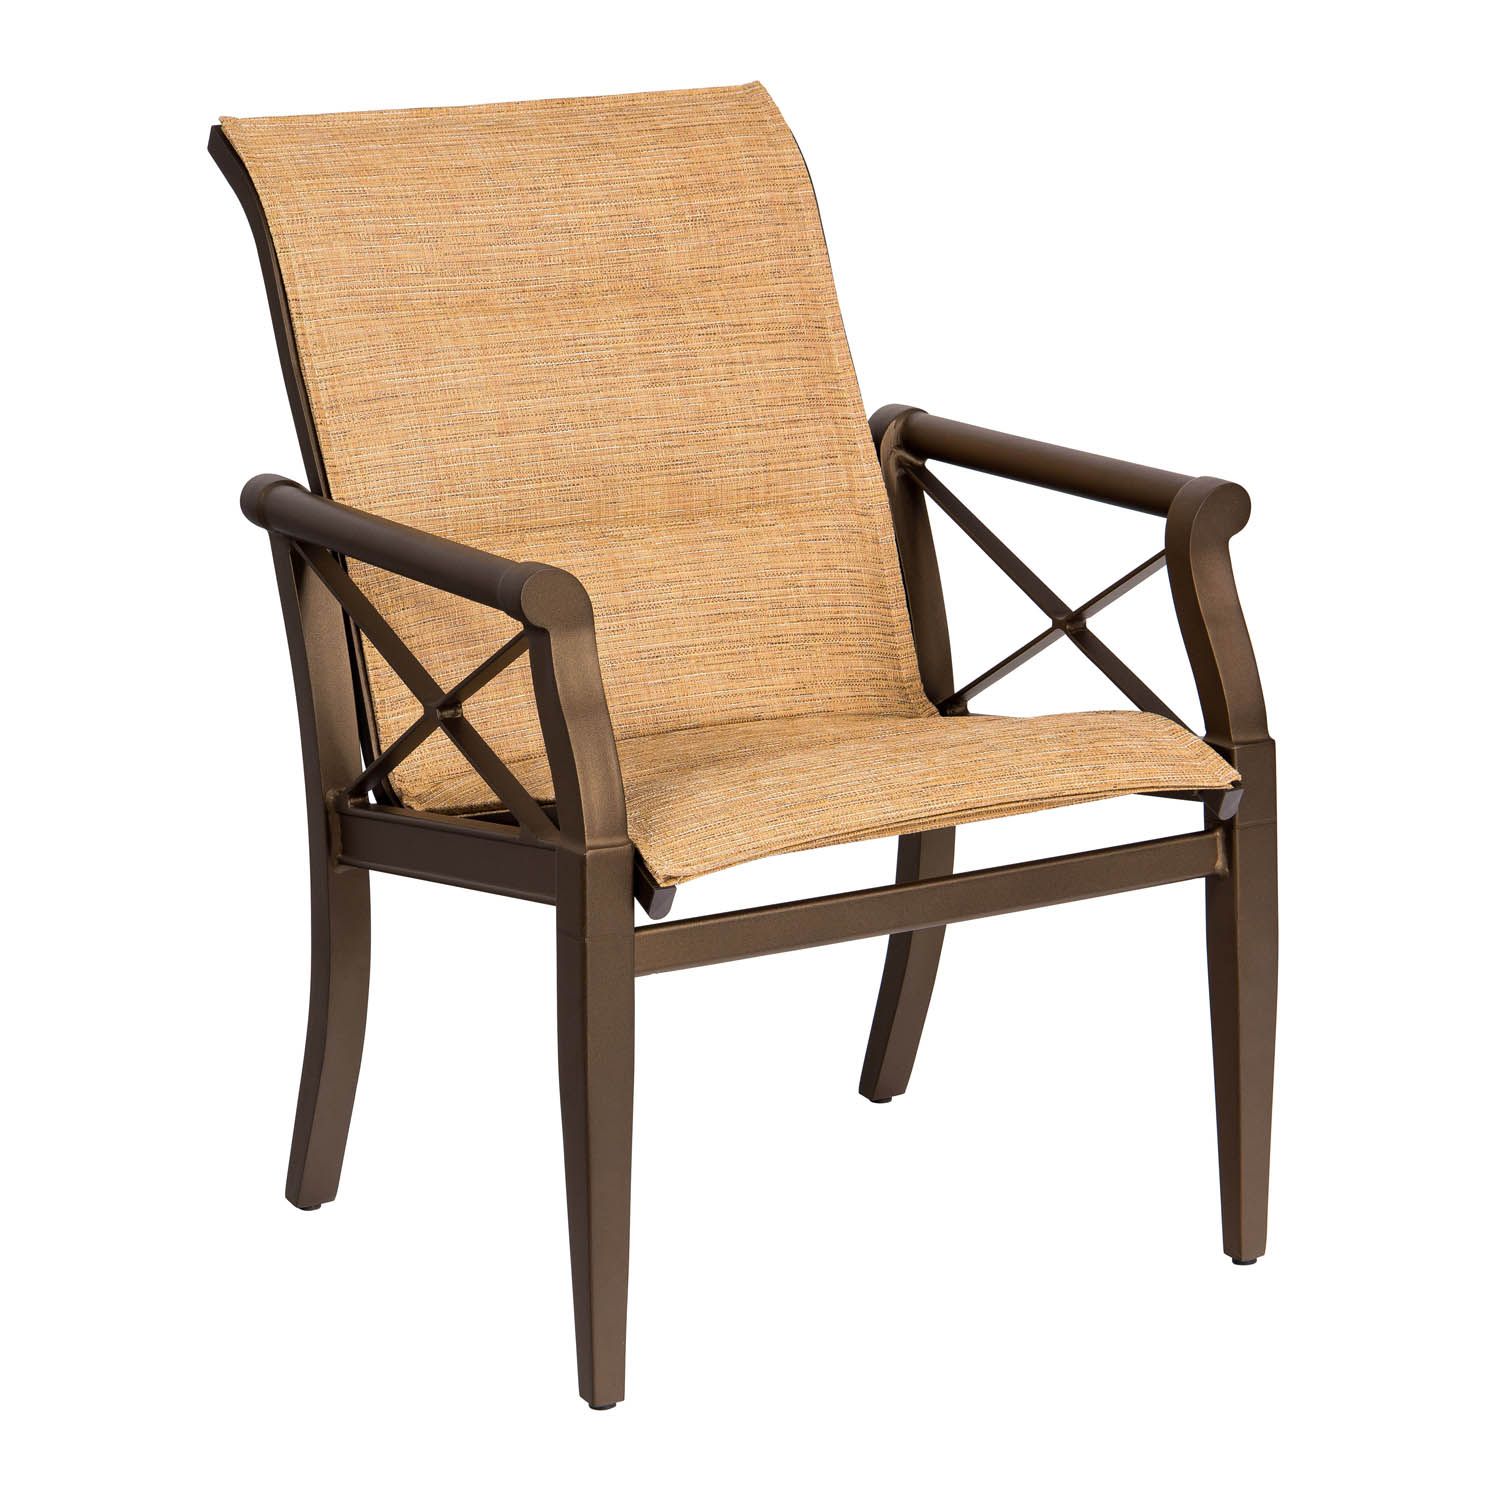 Andover Padded Sling Dining armchair By Woodard